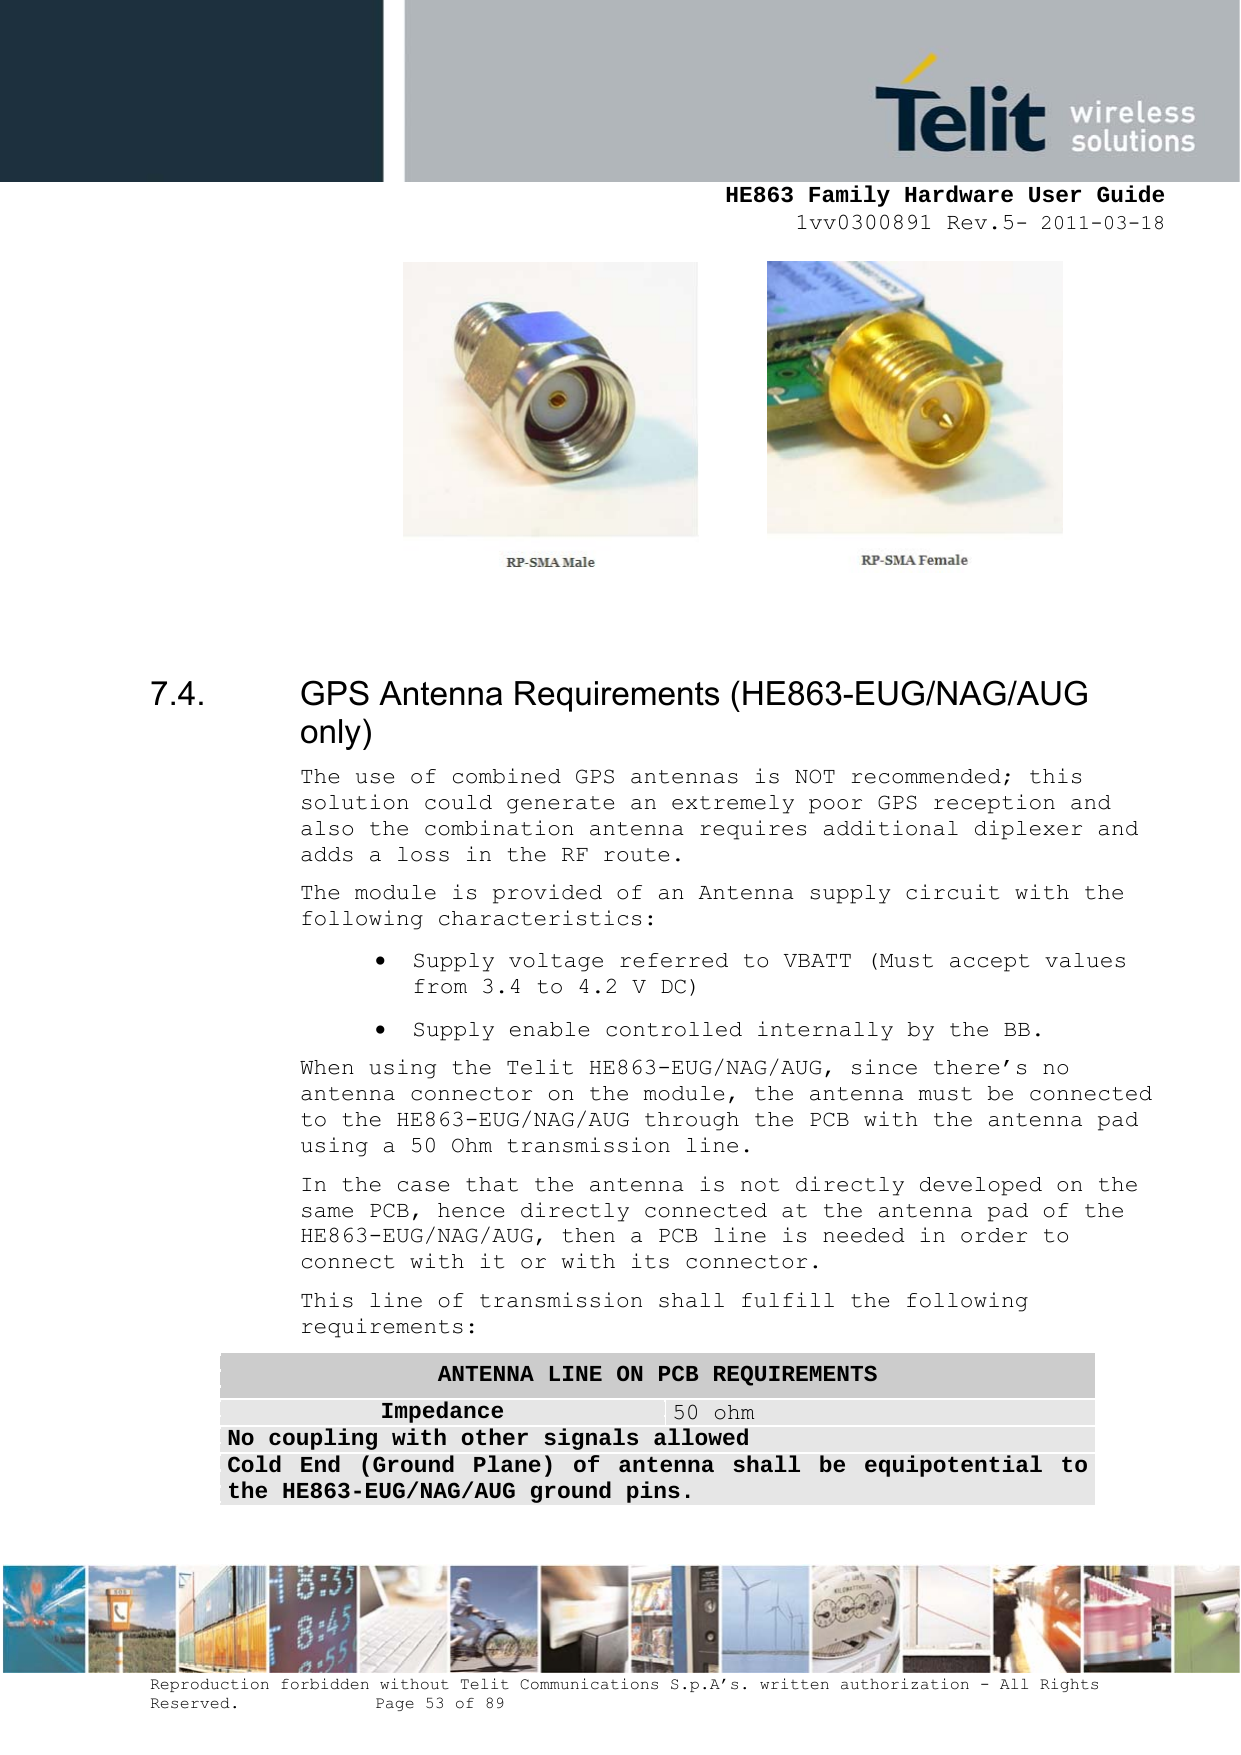     HE863 Family Hardware User Guide 1vv0300891 Rev.5- 2011-03-18    Reproduction forbidden without Telit Communications S.p.A’s. written authorization - All Rights Reserved.    Page 53 of 89           7.4.  GPS Antenna Requirements (HE863-EUG/NAG/AUG only) The use of combined GPS antennas is NOT recommended; this solution could generate an extremely poor GPS reception and also the combination antenna requires additional diplexer and adds a loss in the RF route. The module is provided of an Antenna supply circuit with the following characteristics:  Supply voltage referred to VBATT (Must accept values from 3.4 to 4.2 V DC)  Supply enable controlled internally by the BB. When using the Telit HE863-EUG/NAG/AUG, since there’s no antenna connector on the module, the antenna must be connected to the HE863-EUG/NAG/AUG through the PCB with the antenna pad using a 50 Ohm transmission line. In the case that the antenna is not directly developed on the same PCB, hence directly connected at the antenna pad of the HE863-EUG/NAG/AUG, then a PCB line is needed in order to connect with it or with its connector. This line of transmission shall fulfill the following requirements: ANTENNA LINE ON PCB REQUIREMENTS Impedance  50 ohm No coupling with other signals allowed Cold End (Ground Plane) of antenna shall be equipotential to the HE863-EUG/NAG/AUG ground pins. 